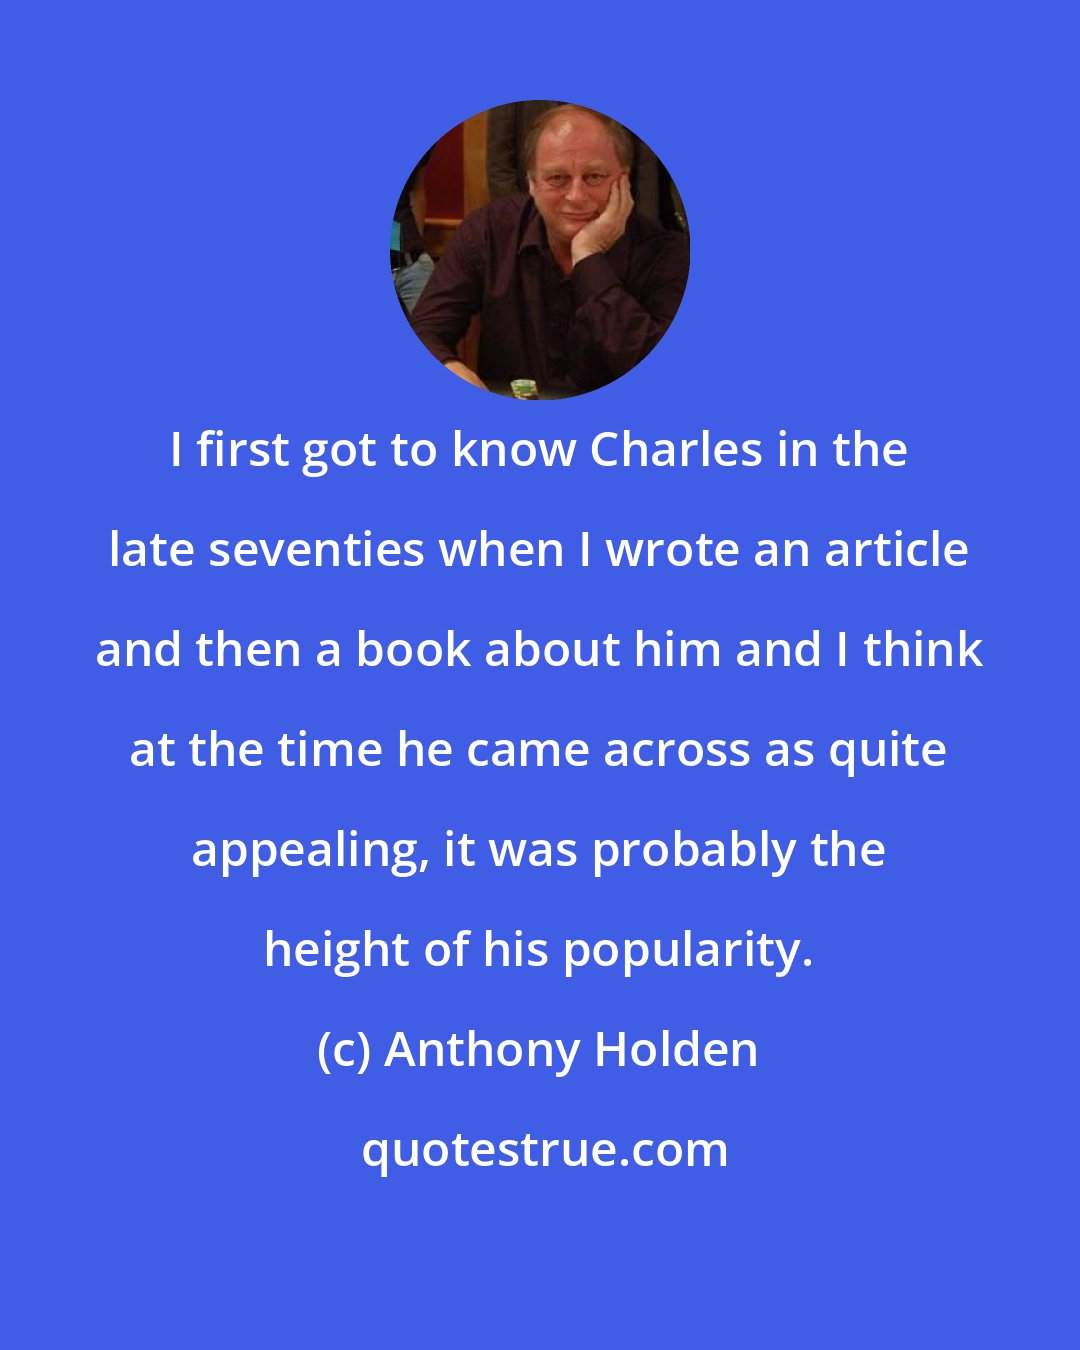 Anthony Holden: I first got to know Charles in the late seventies when I wrote an article and then a book about him and I think at the time he came across as quite appealing, it was probably the height of his popularity.